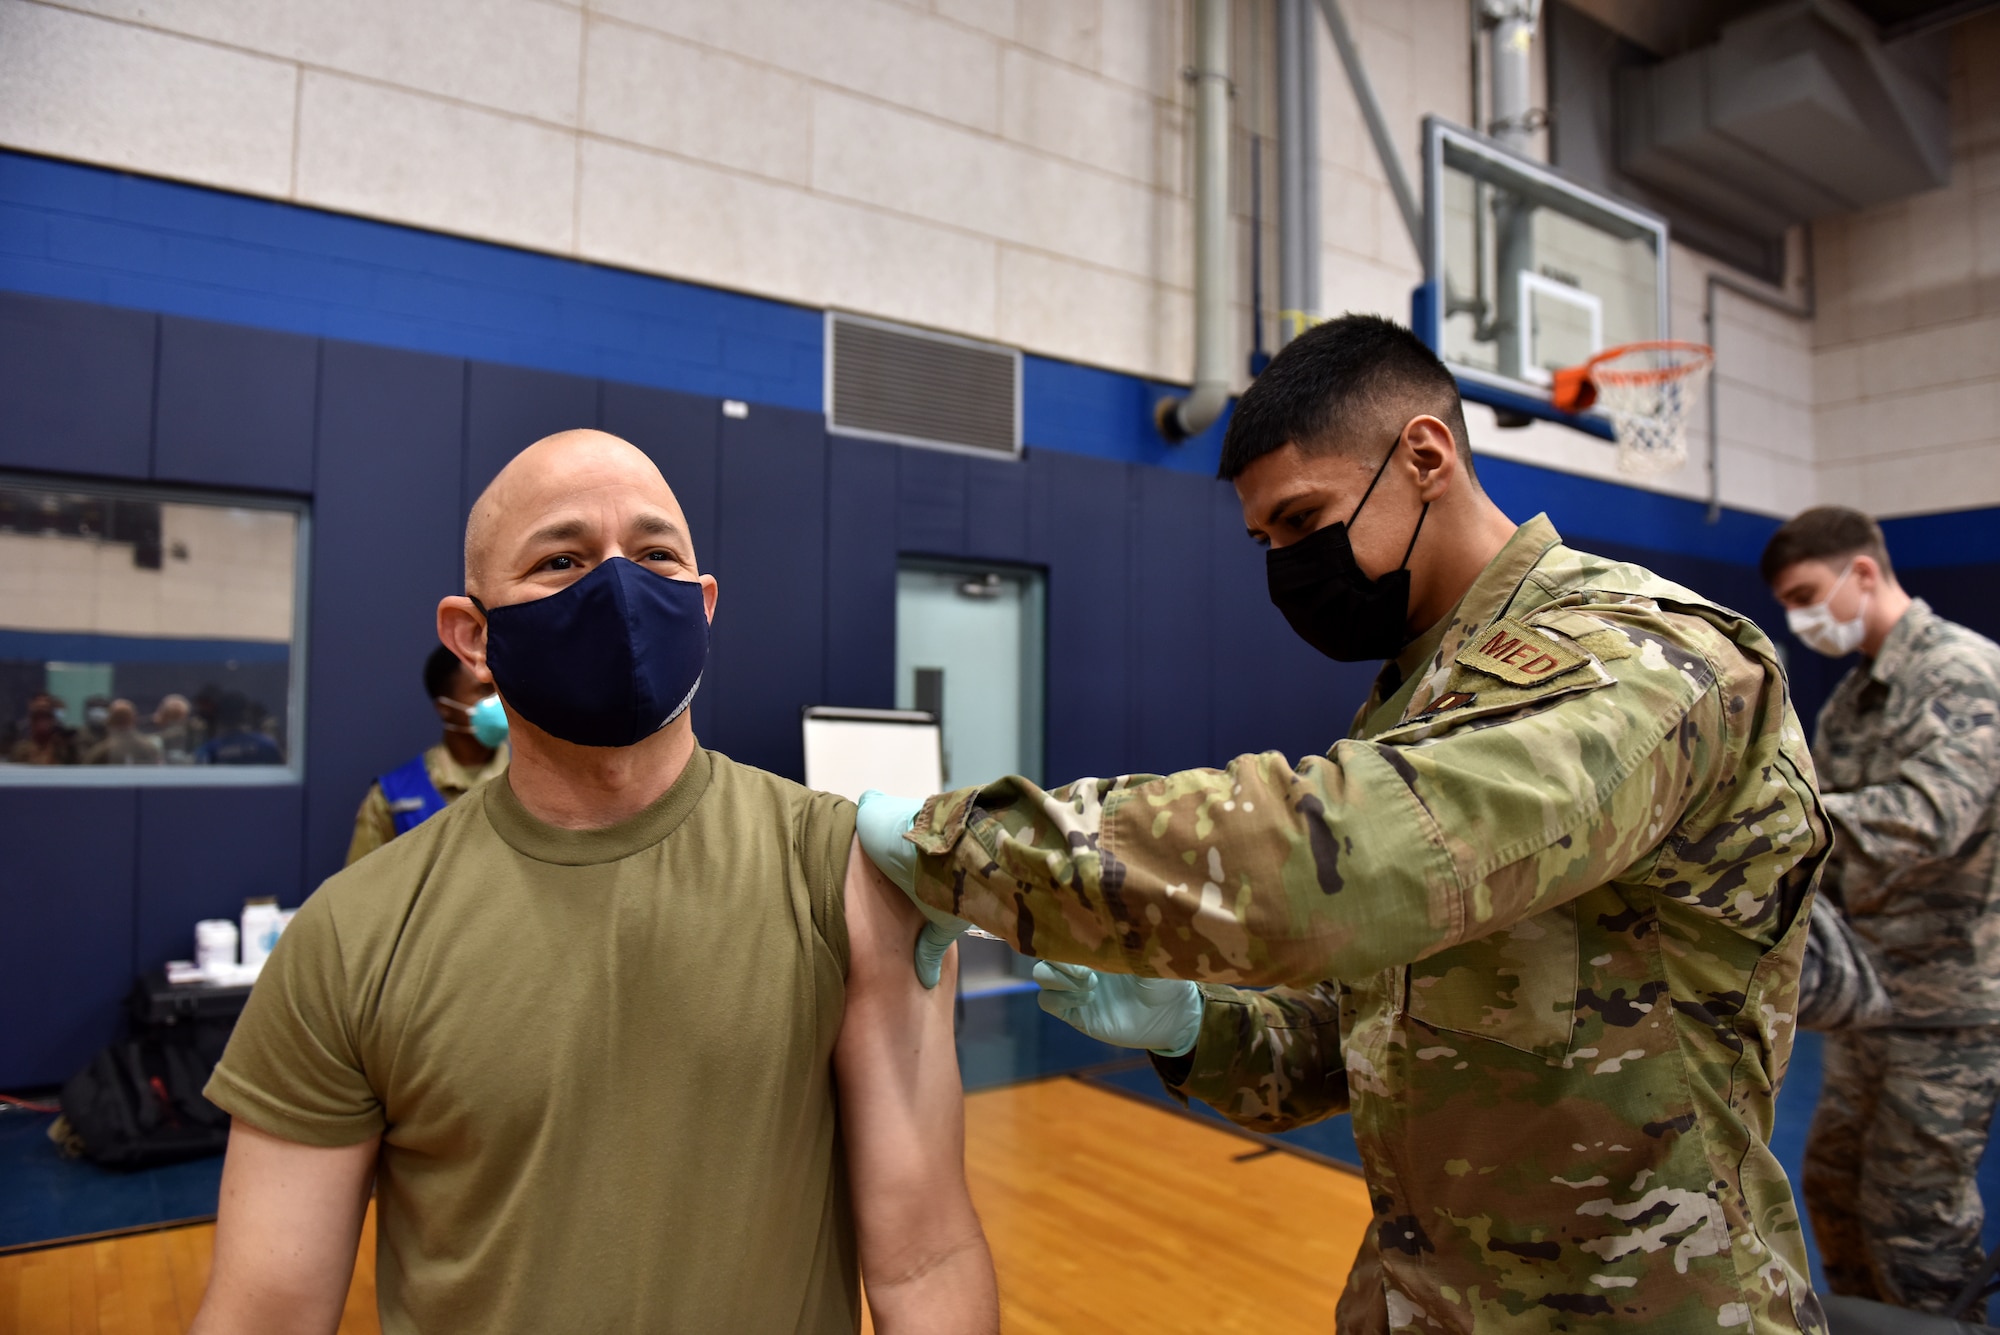 U.S. Air Force Airman 1st Class Benjamin Loera, 17th Operational Medical Readiness Squadron medical technician for active duty, administers the COVID-19 vaccine to Col. Andres Nazario, 17th Training Wing commander at the Mathis Fitness Center on Goodfellow Air Force Base, Texas, Jan. 22, 2021. On Jan. 20, Team Goodfellow vaccinated its frontline and mission essential positions and those who are considered high risk, first, in accordance with the Department of the Air Forces distribution plan. (U.S. Air Force photo by Staff Sgt. Seraiah Wolf)